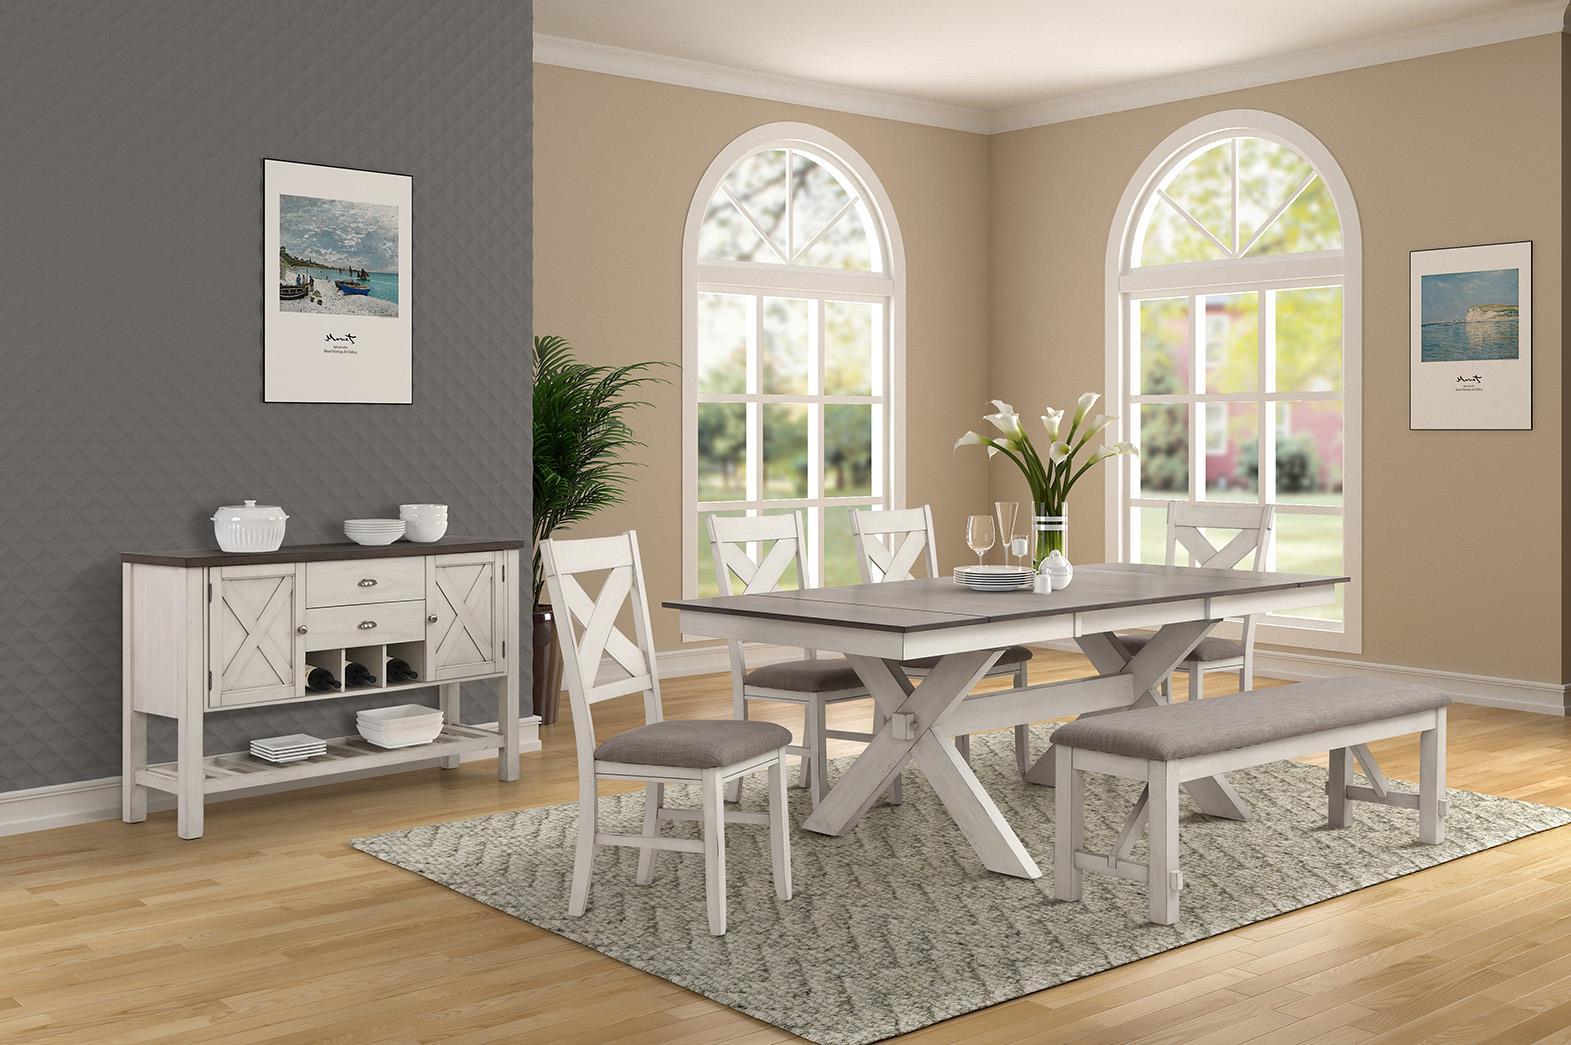 Transitional, Farmhouse Dining Table HOMESTEAD 5812-500 5812-500 in Cream, Gray 